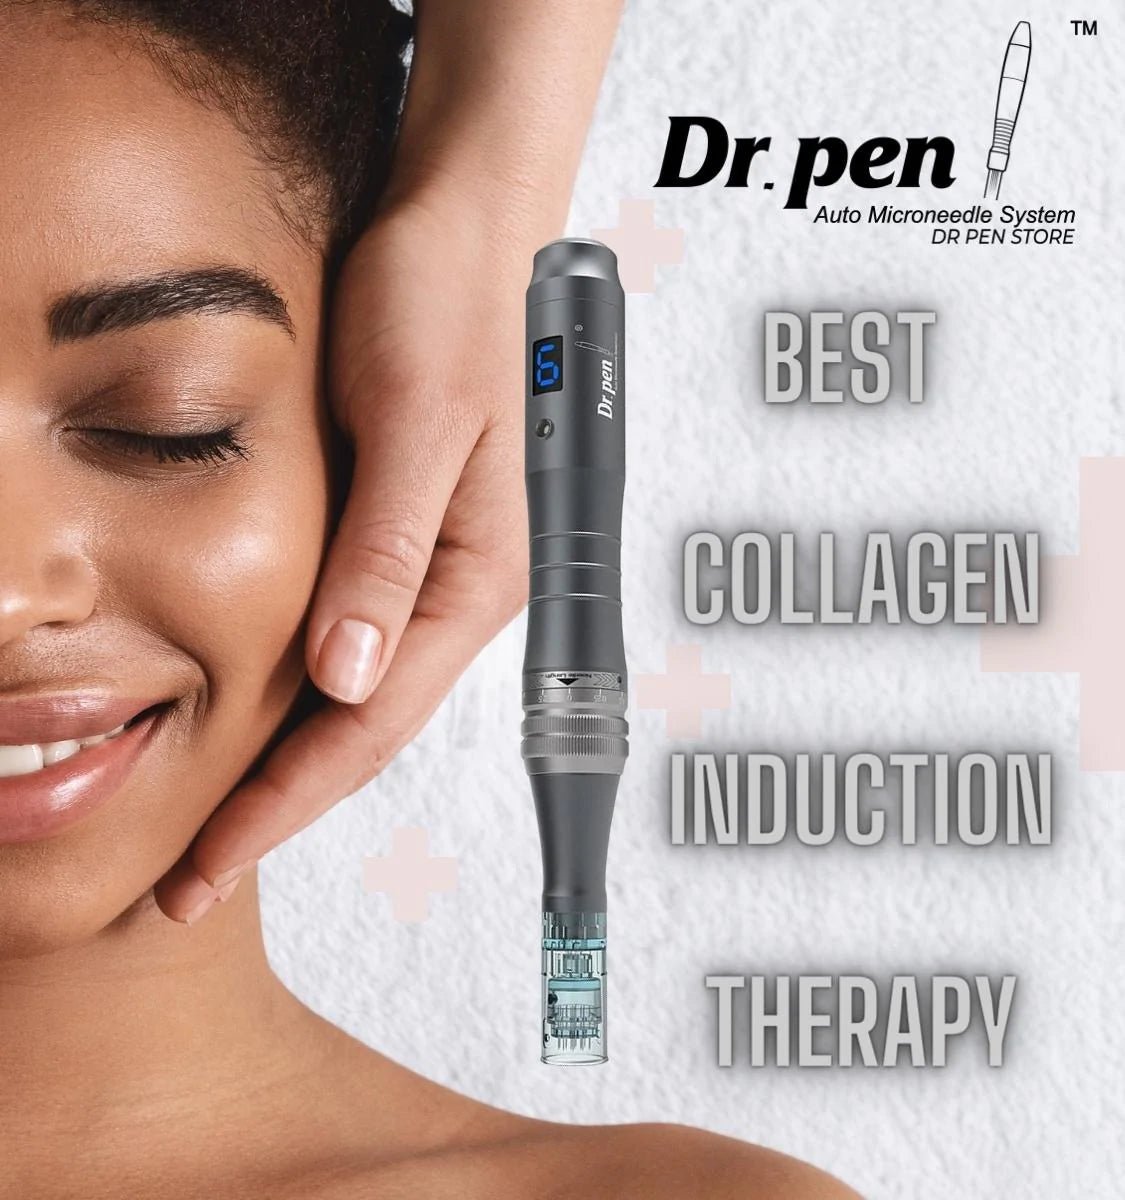 What is the best Dr pen to buy? – Dr. Pen Store